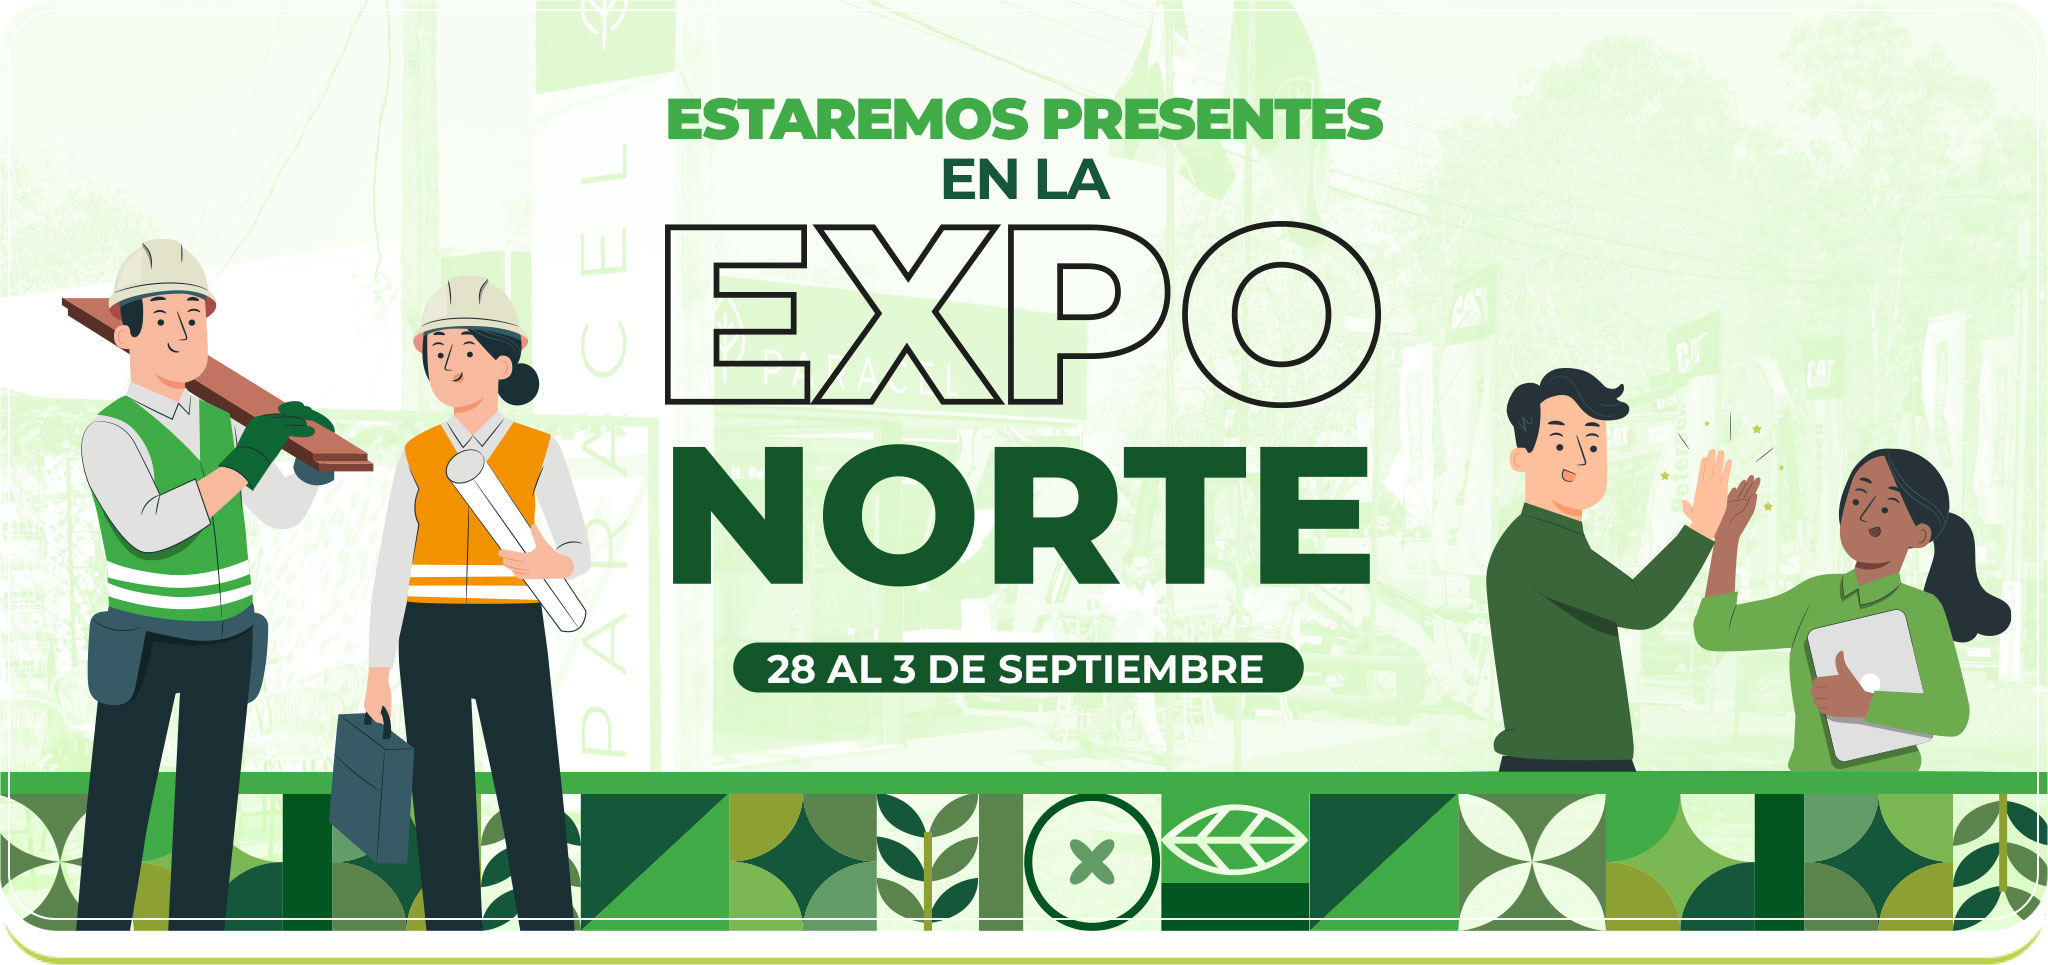 Paracel will be present at Expo Norte 2023